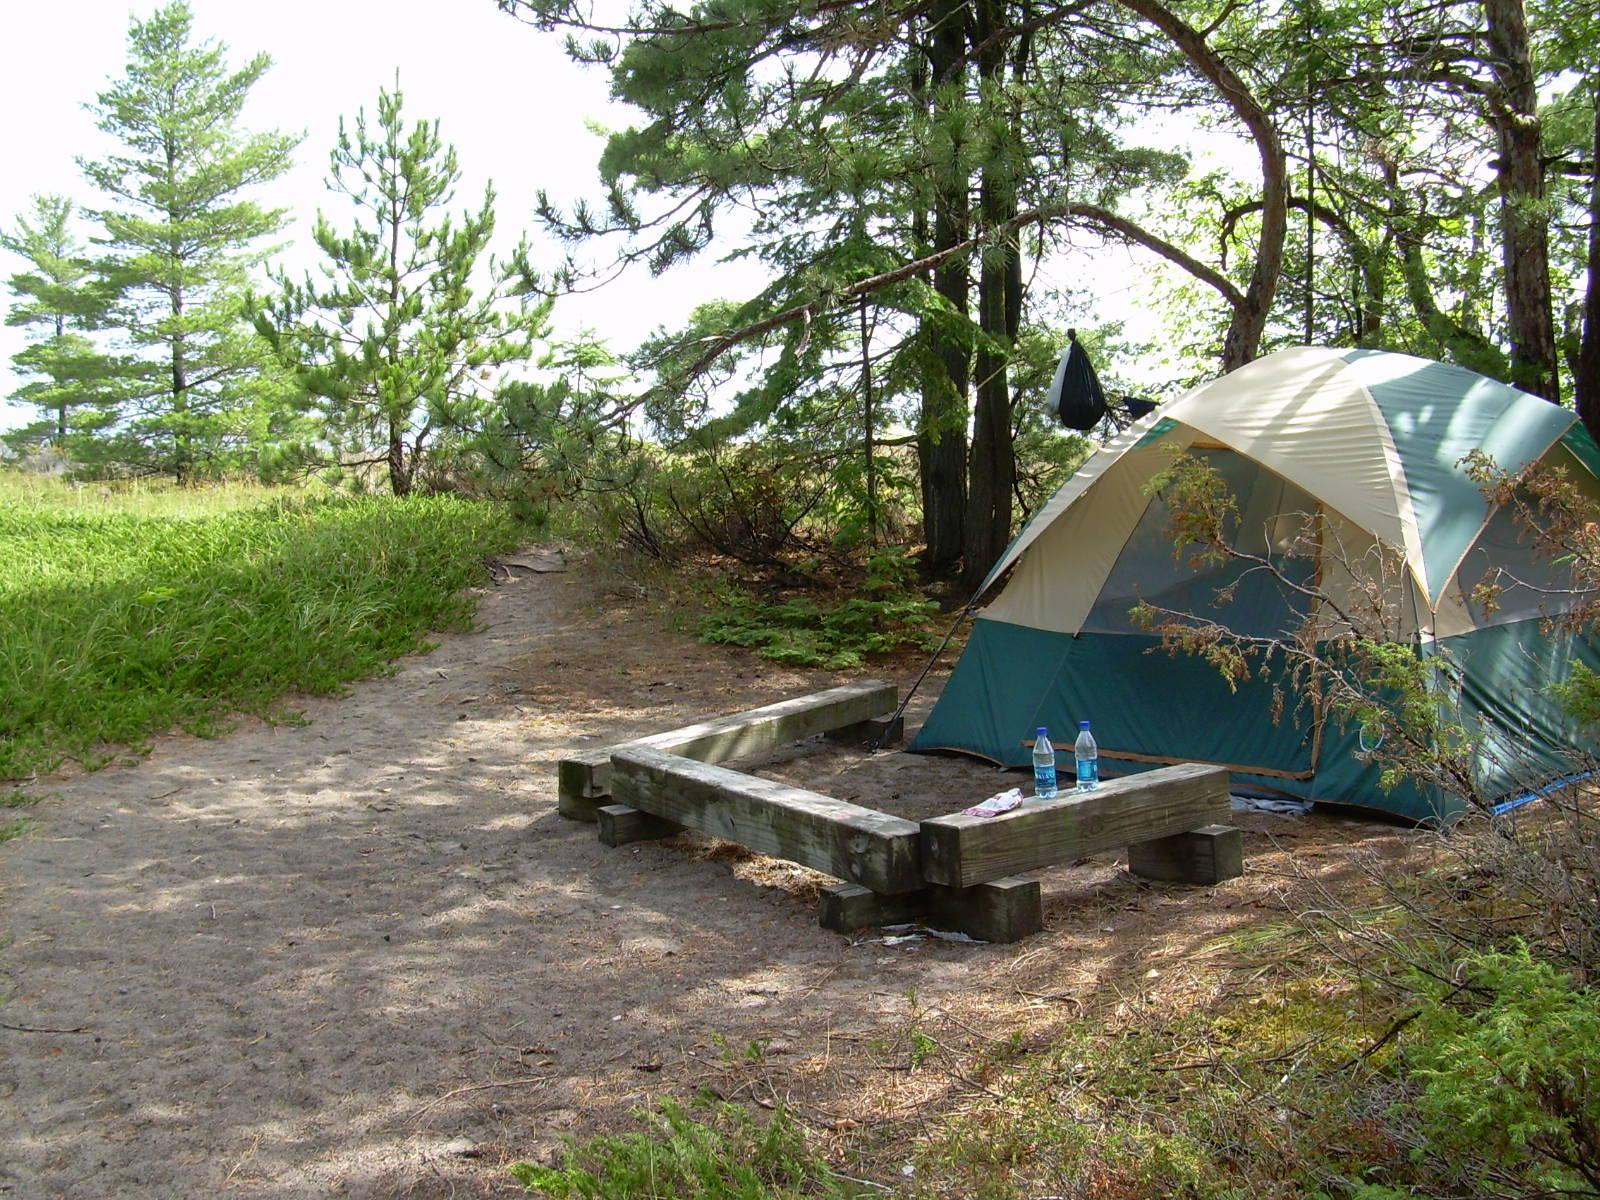 Tent on sand surrounded by conifer trees and grasses.